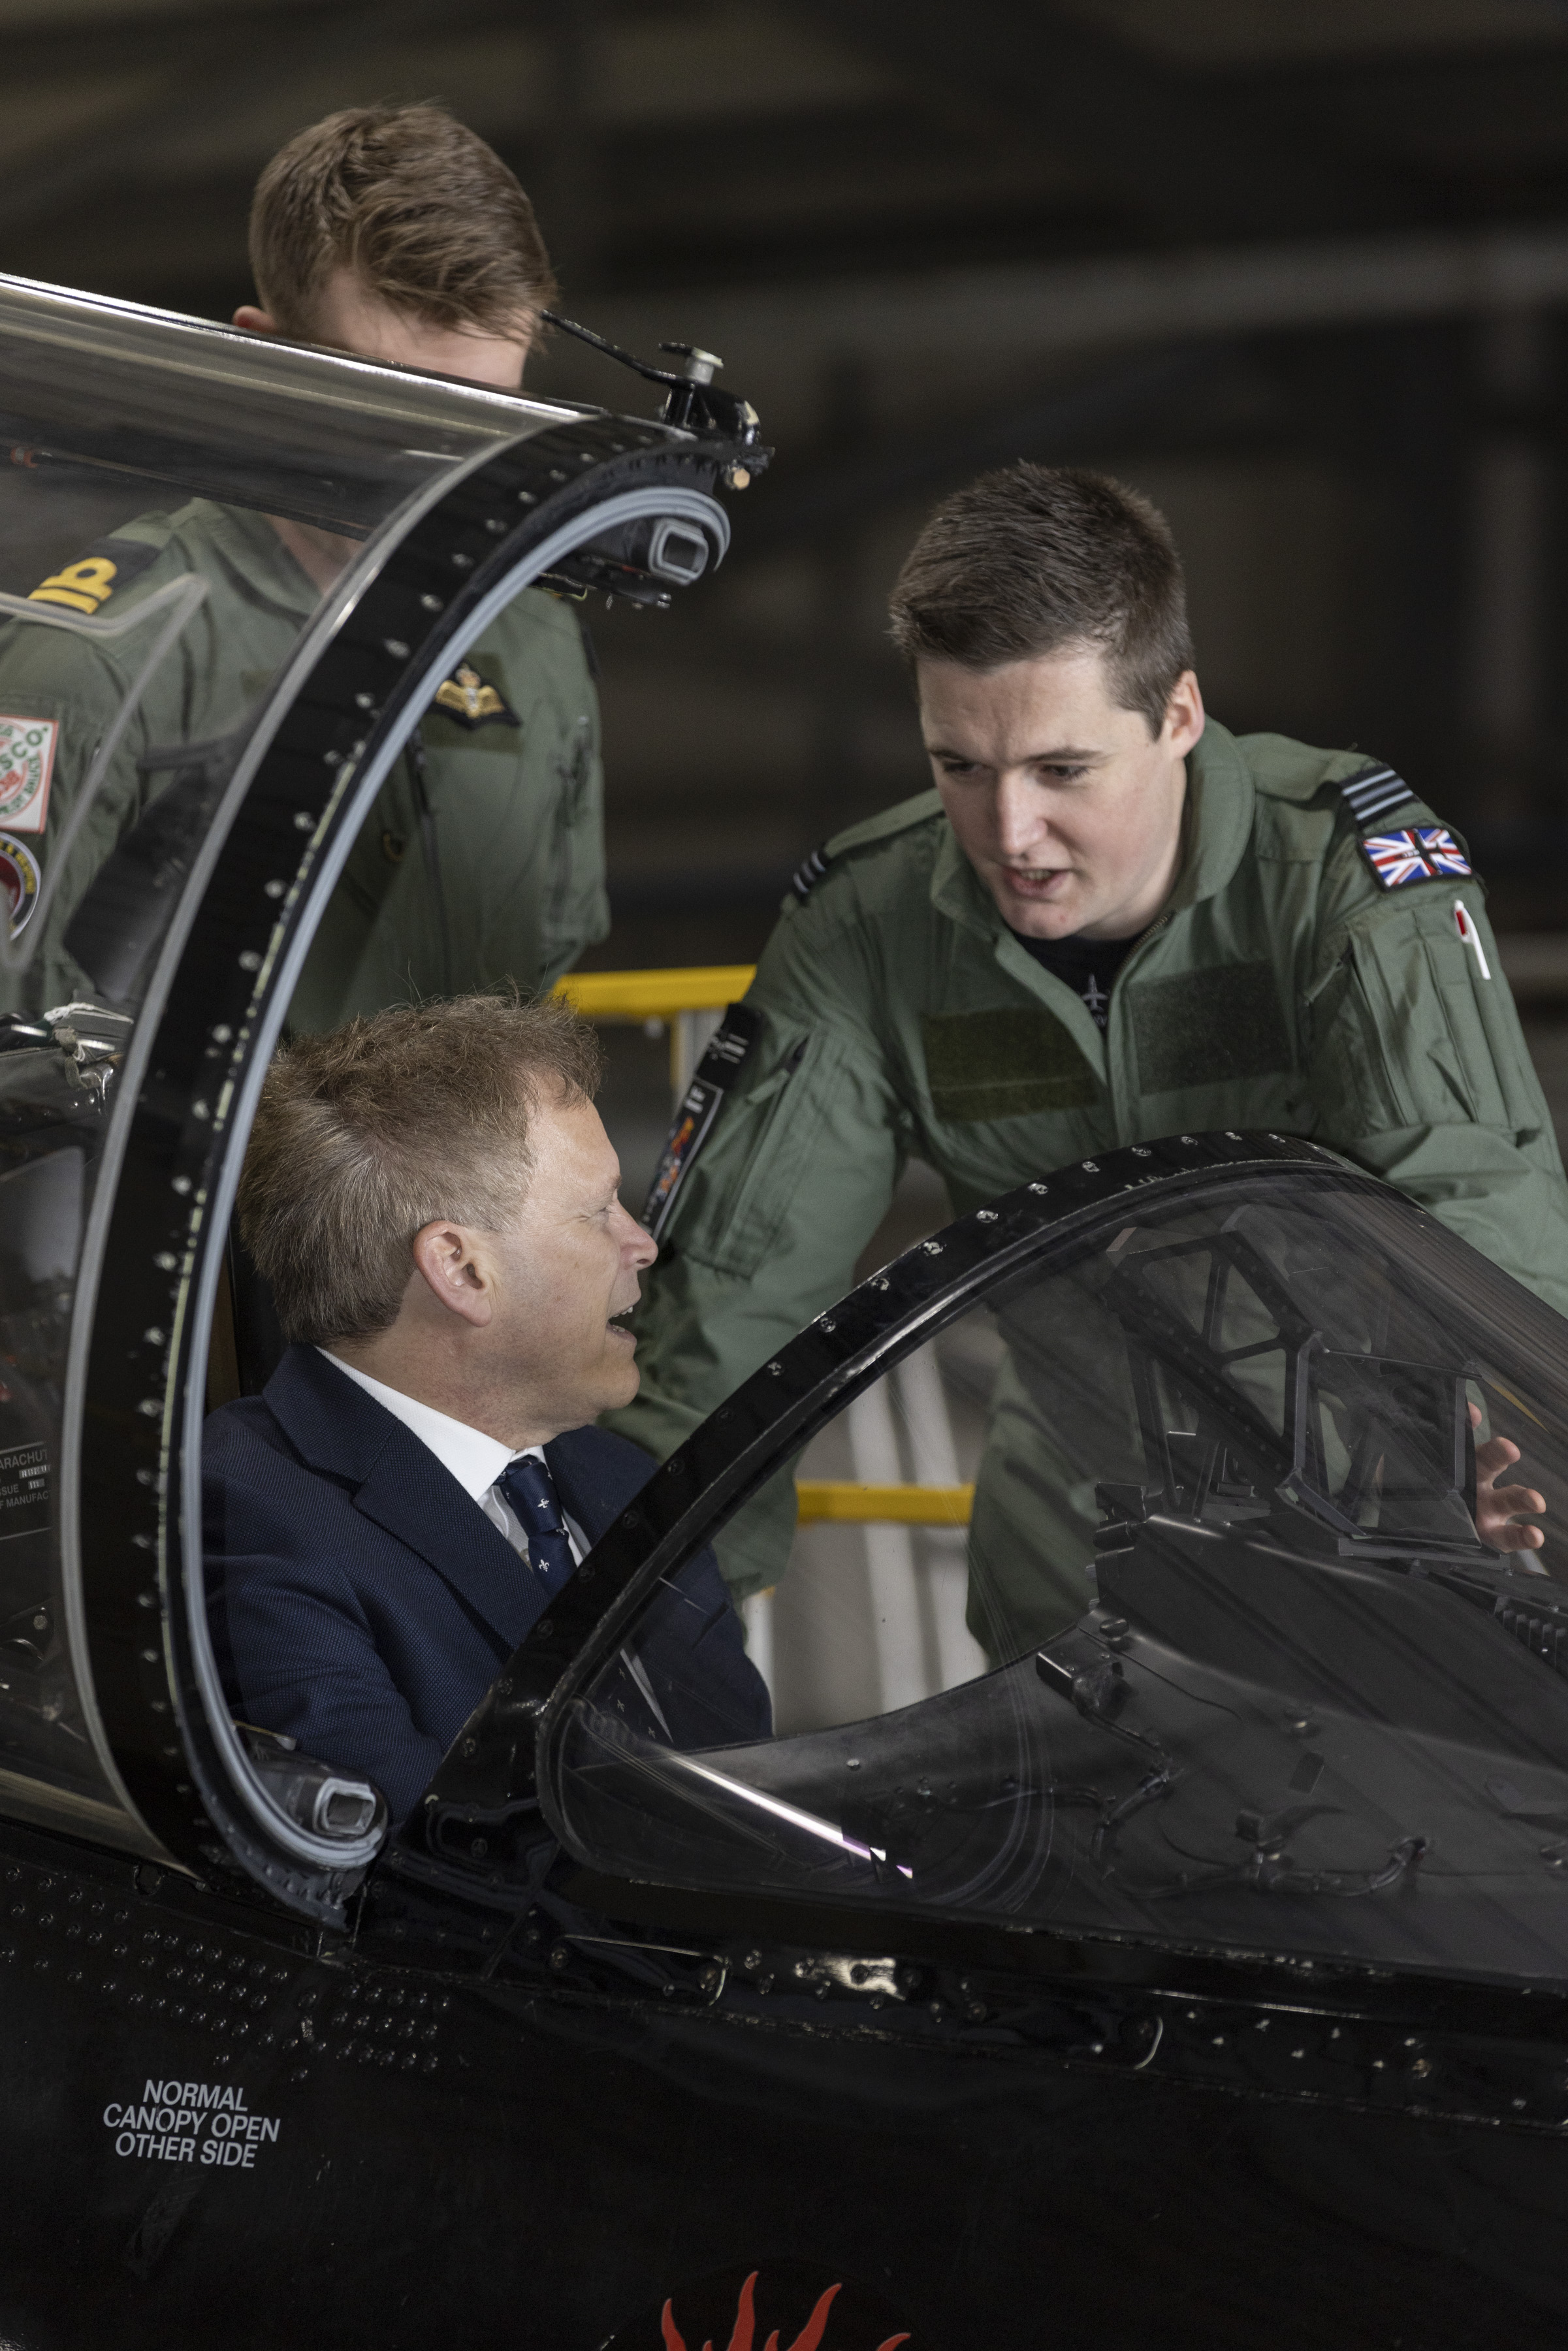 Defence Secretary chatting to personnel whilst sitting in an aircraft cockpit